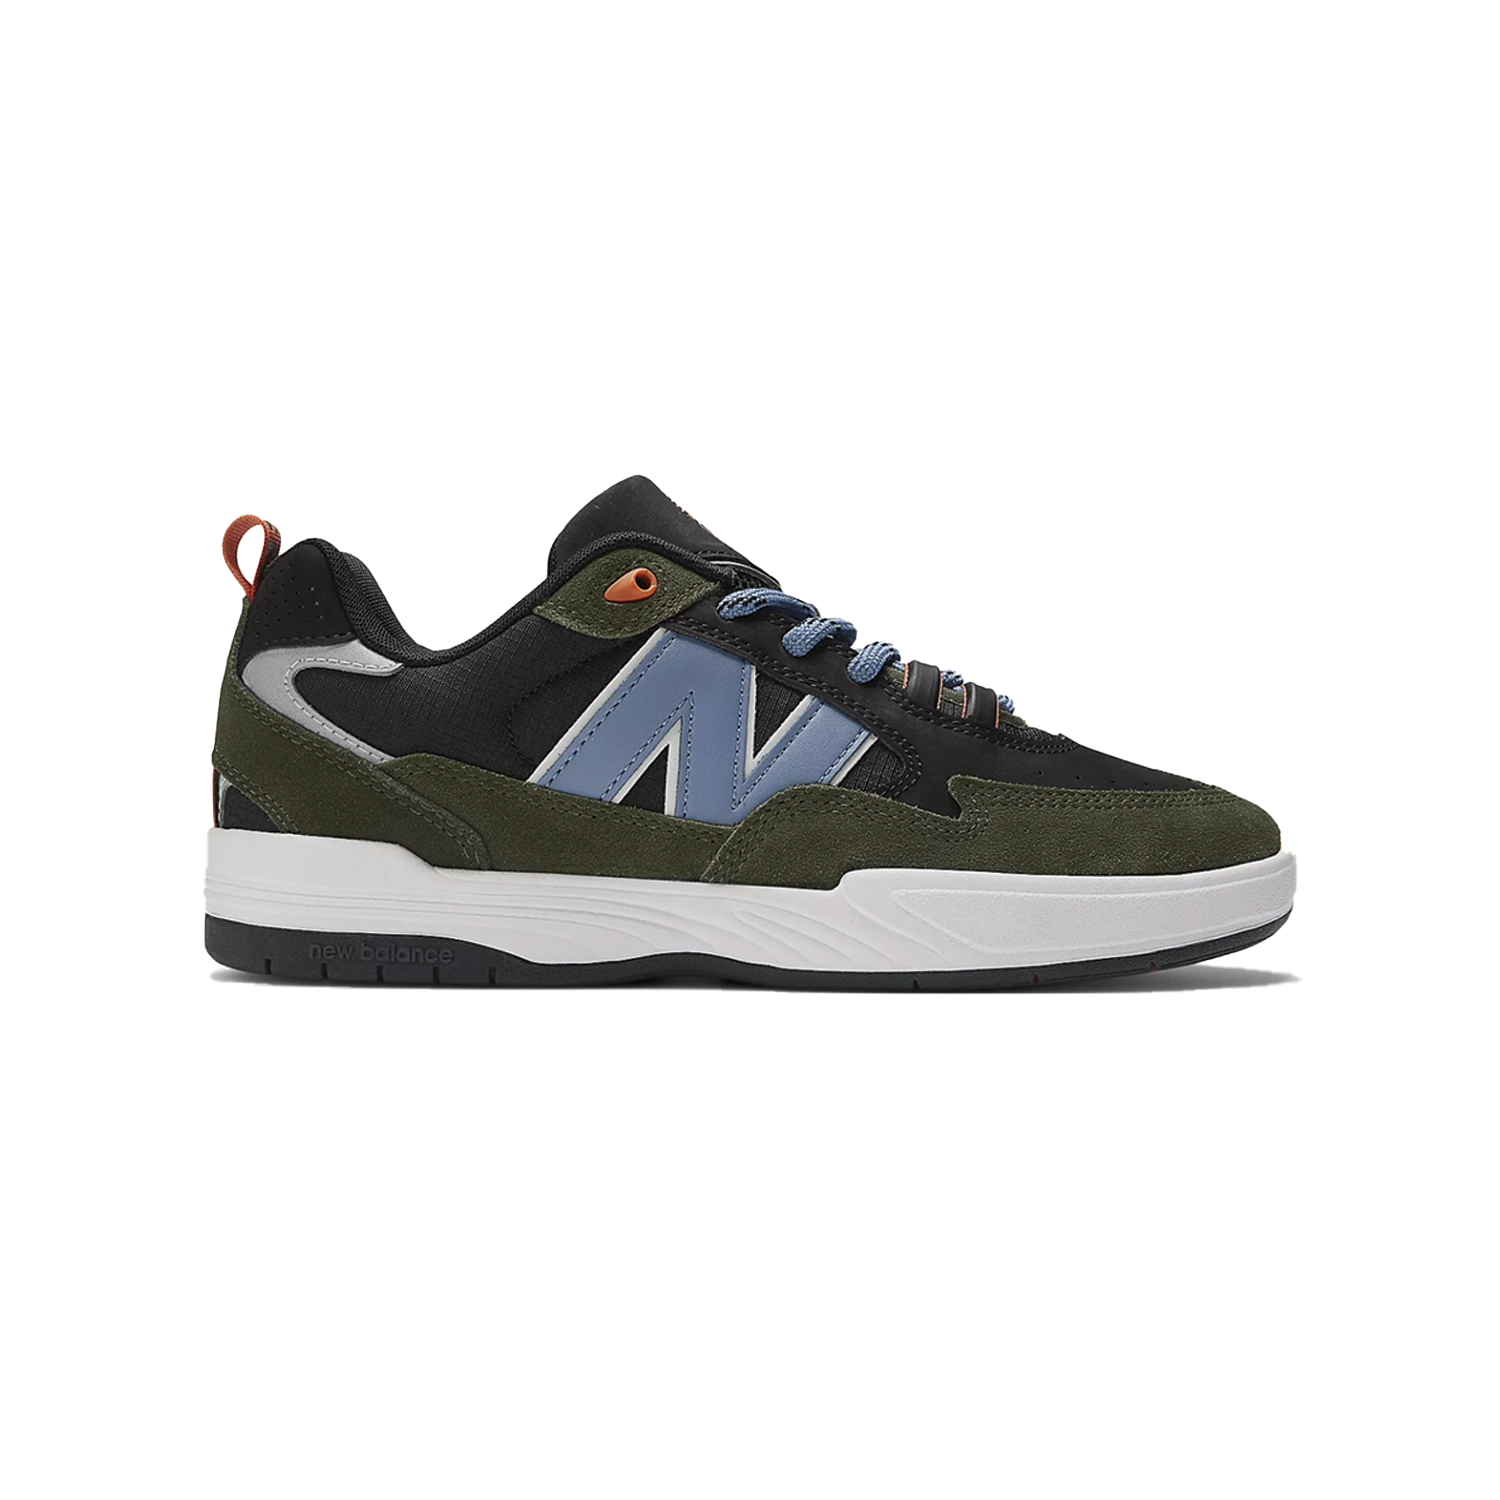 NB Numeric Tiago Lemos 808 Forest green with black NM808LGC